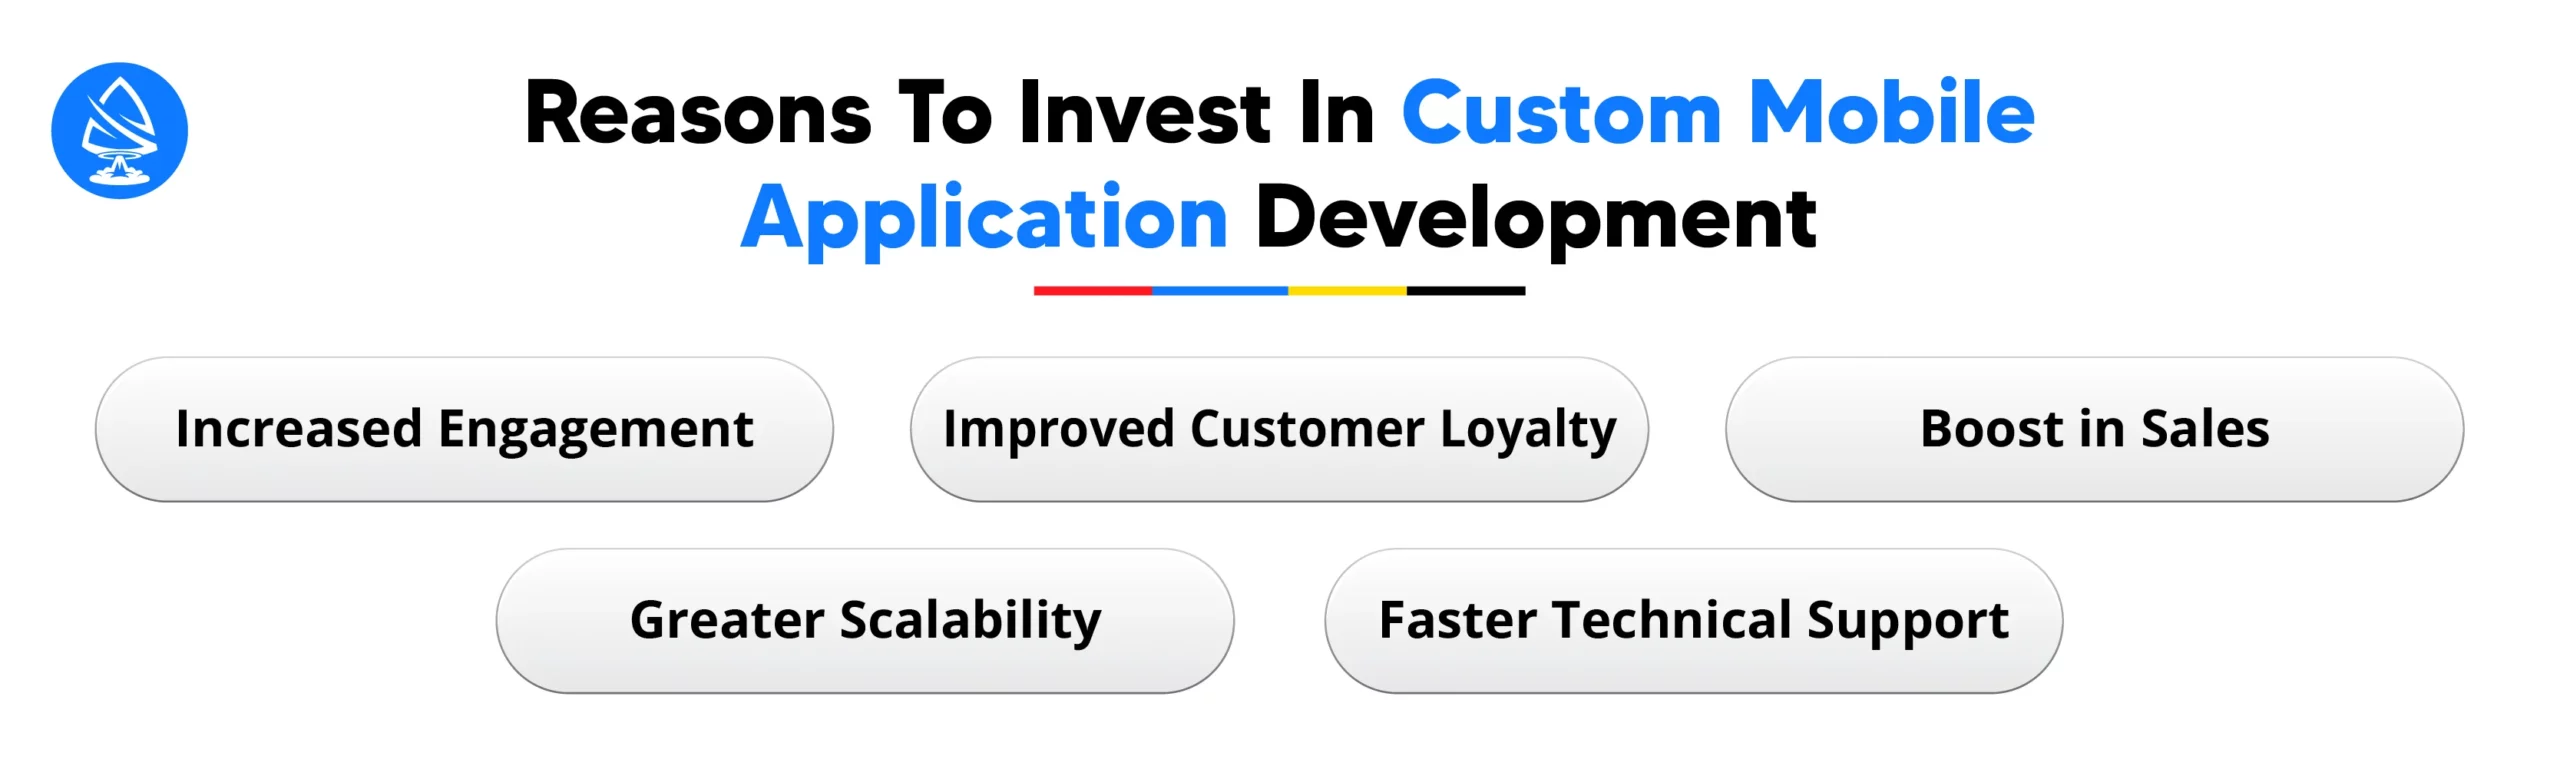 Reasons To Invest In Custom Mobile Application Development